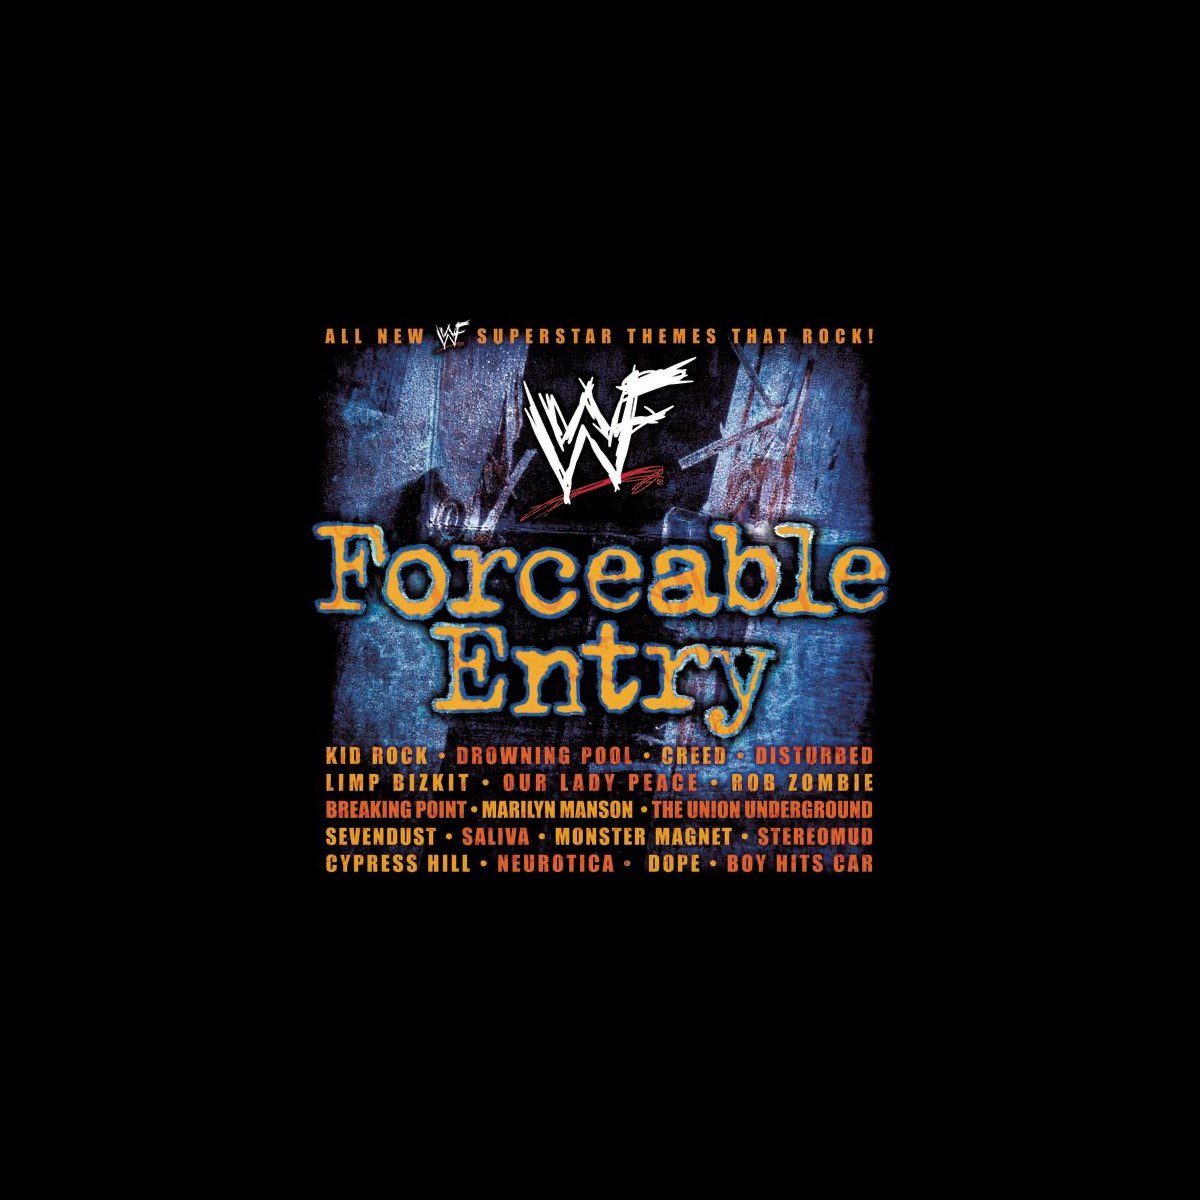 WWF Forceable Entry by Various Artists on Apple Music